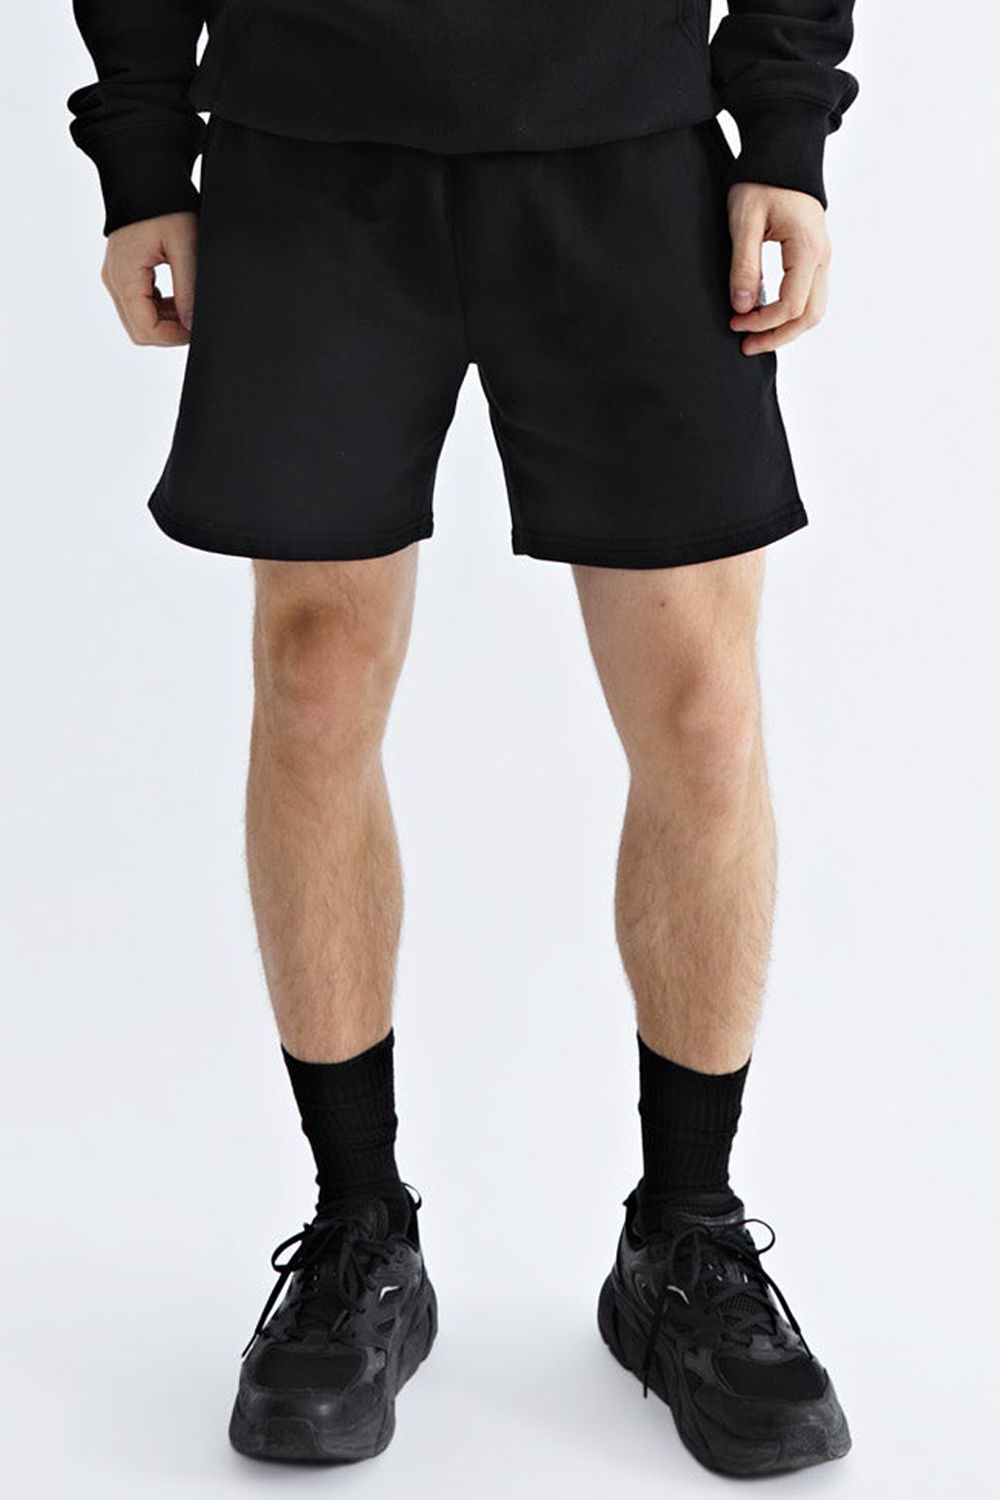 REIGNING CHAMP - 【国内正規品】 MIDWEIGHT TERRY SHORT 6 / ミッド 